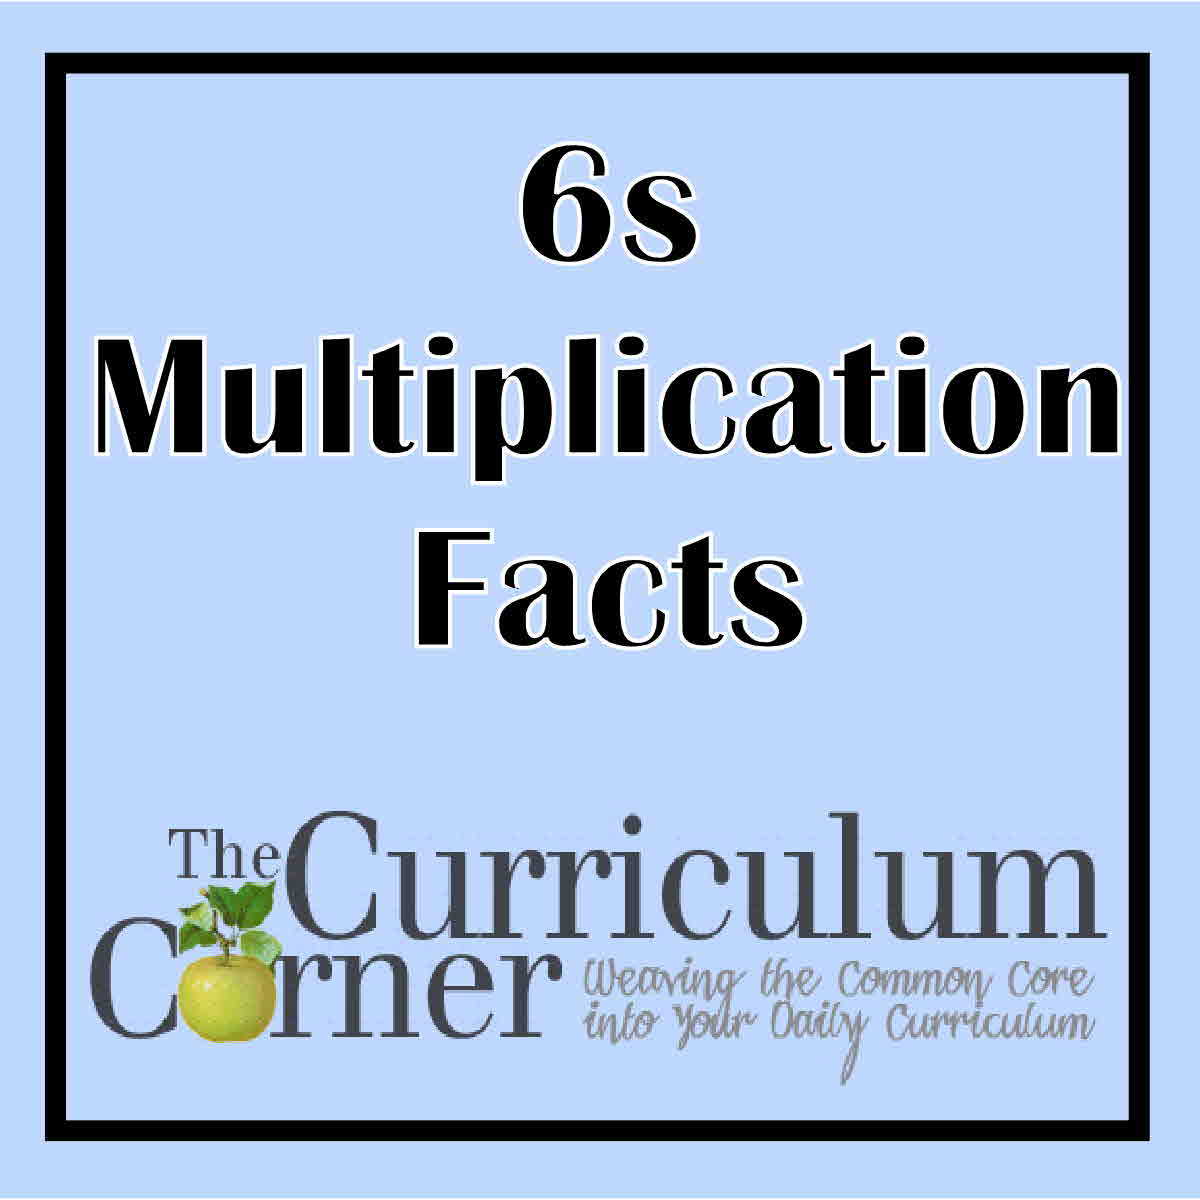 6s-multiplication-facts